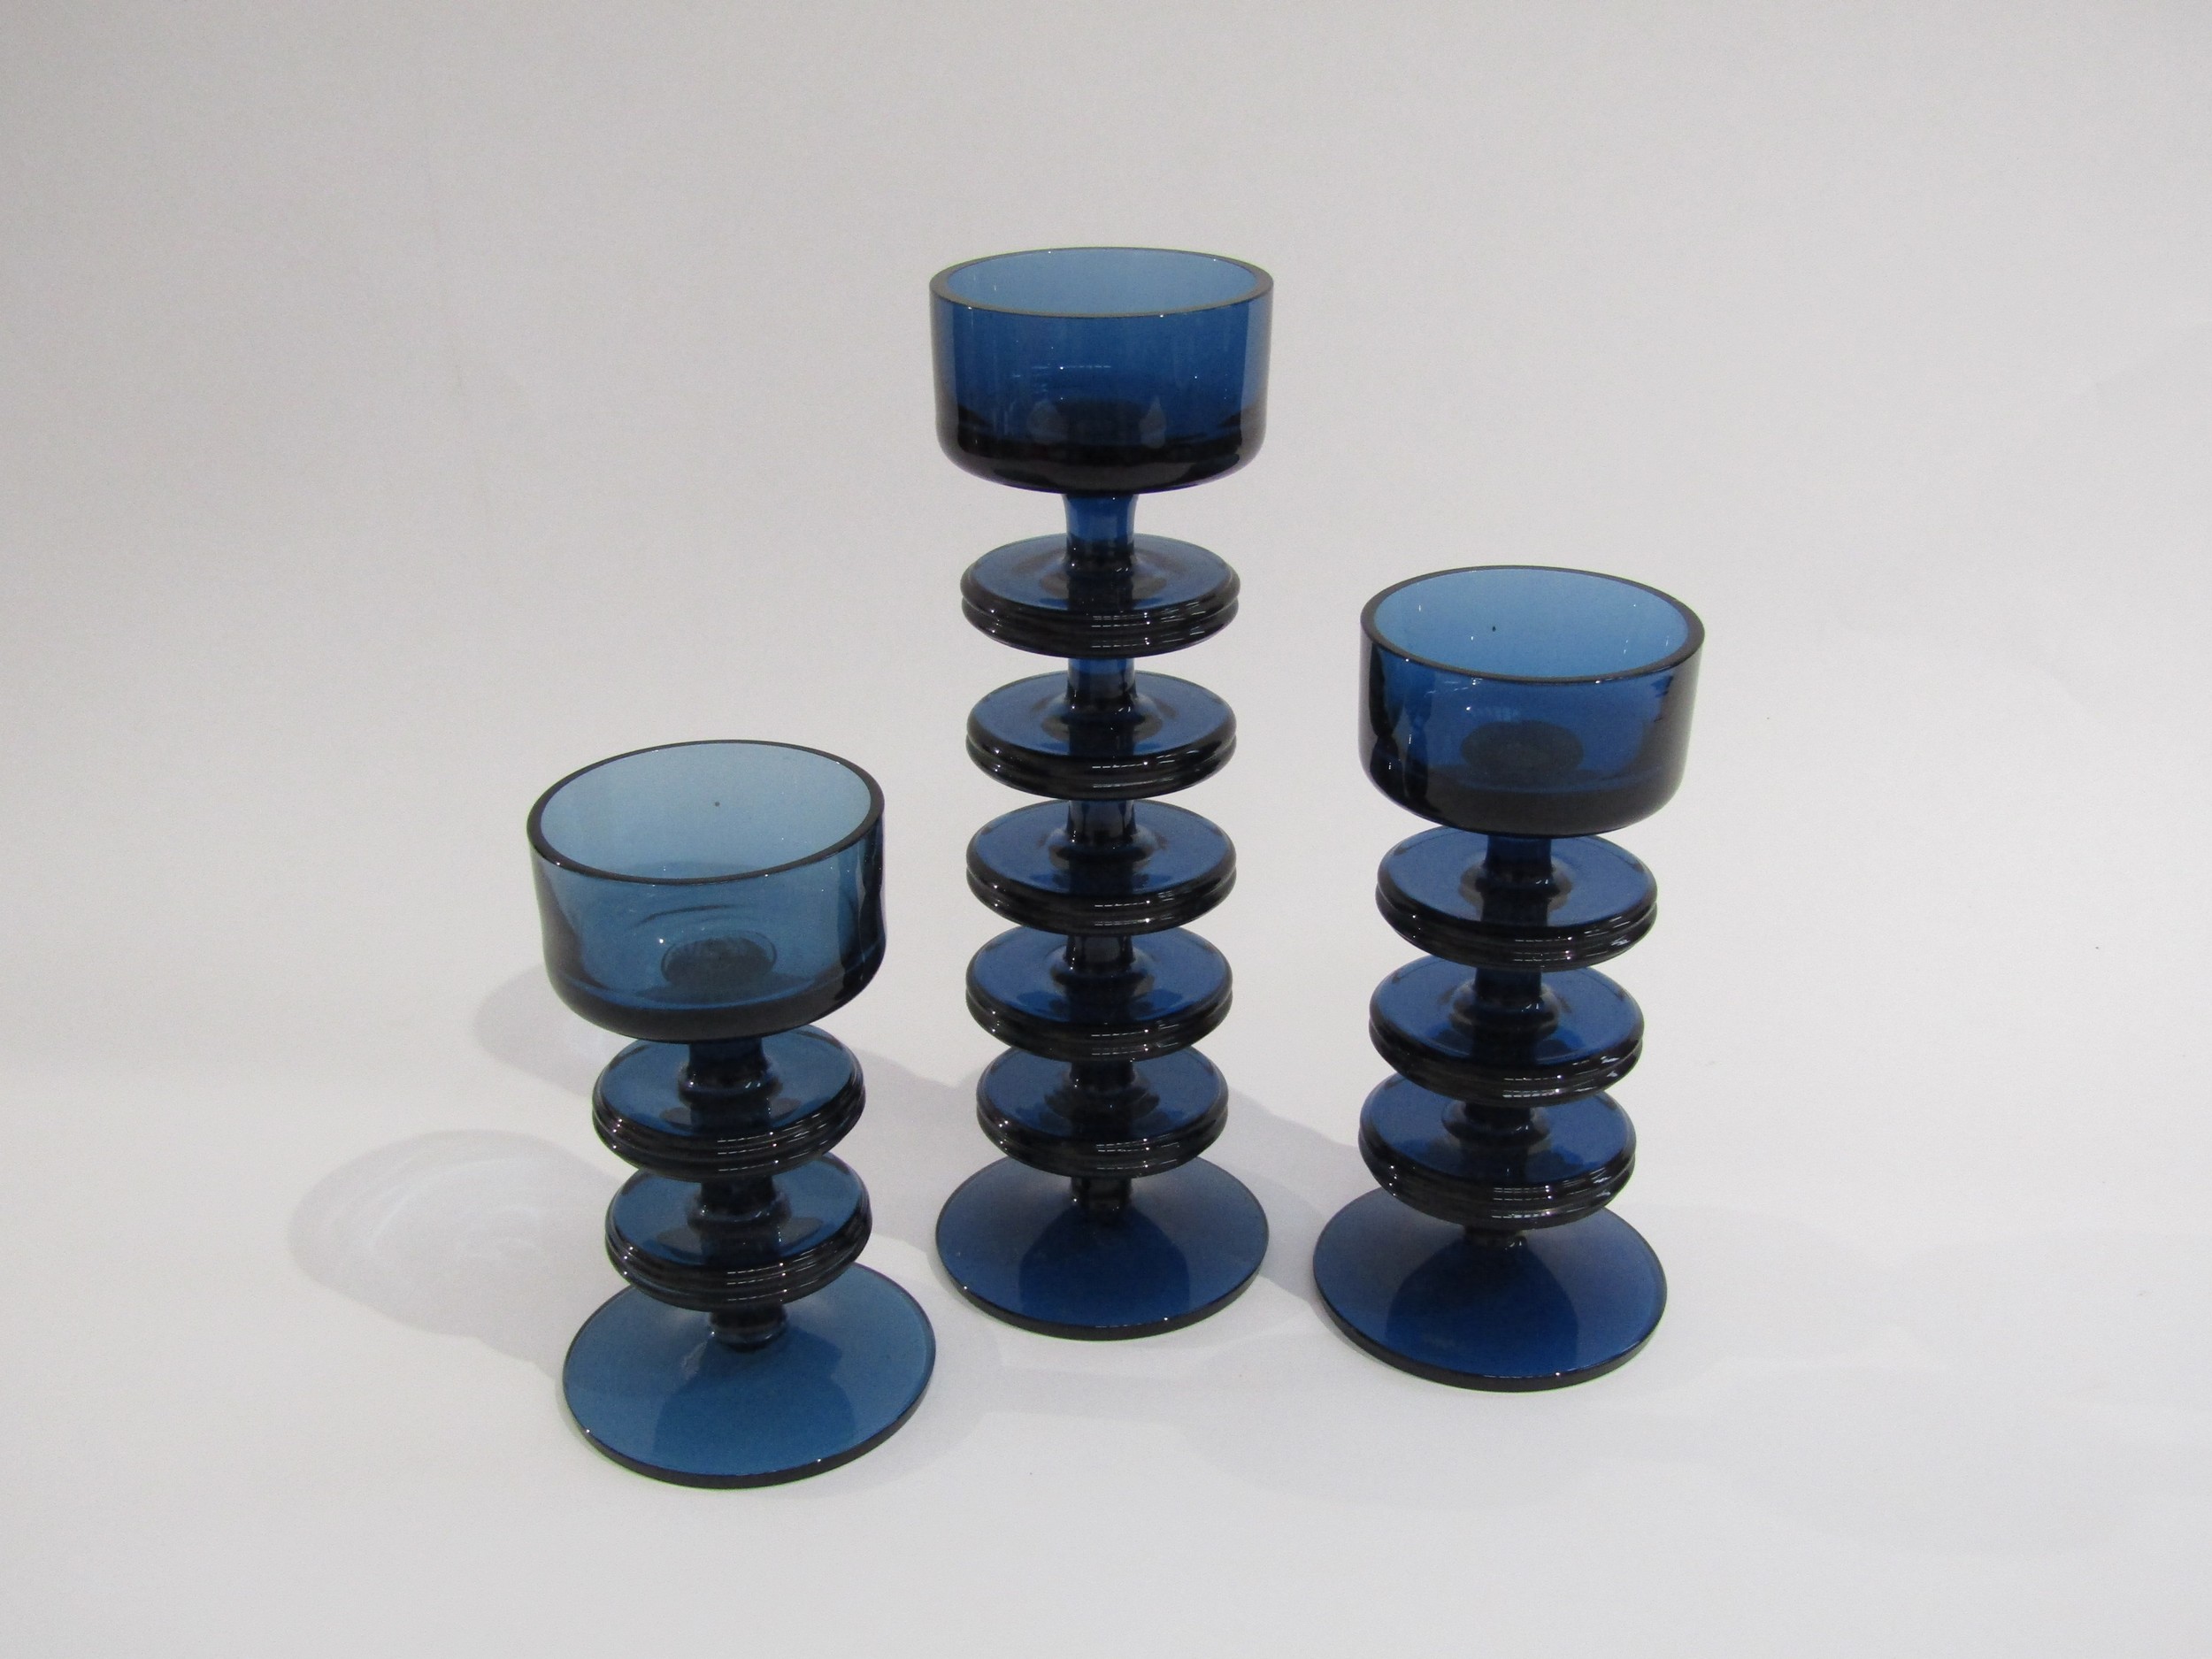 Three Sheringham candleholders in blue glass 1 x 5 ring, 1 x 3 ring and 1 x 2 ring, designed by